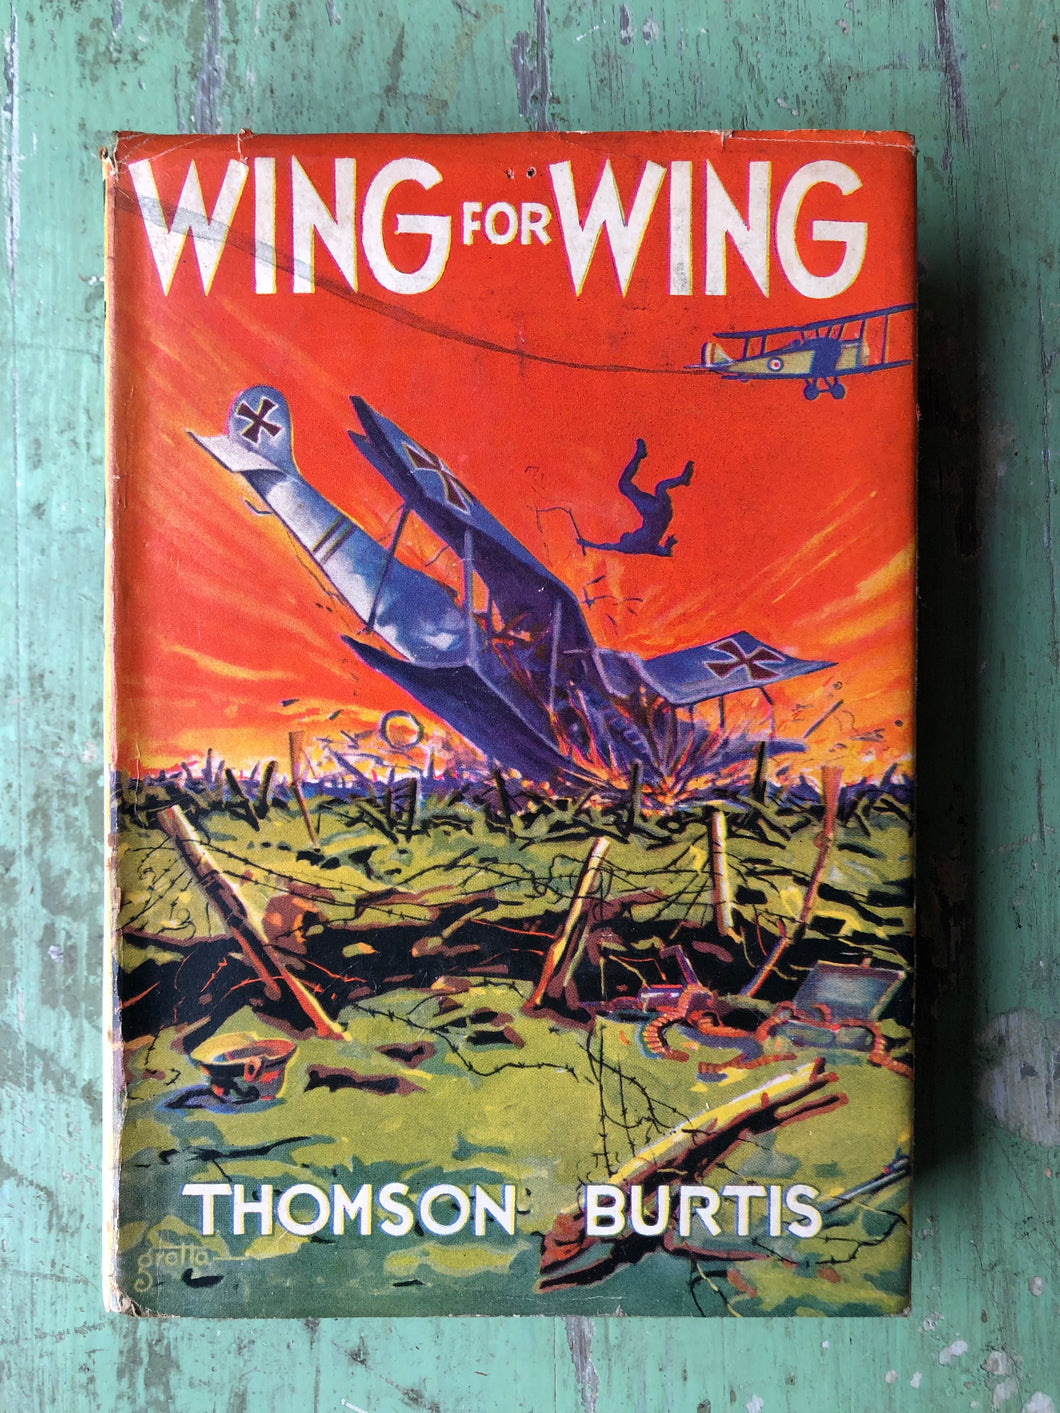 Wing for Wing. by Thomson Burtis